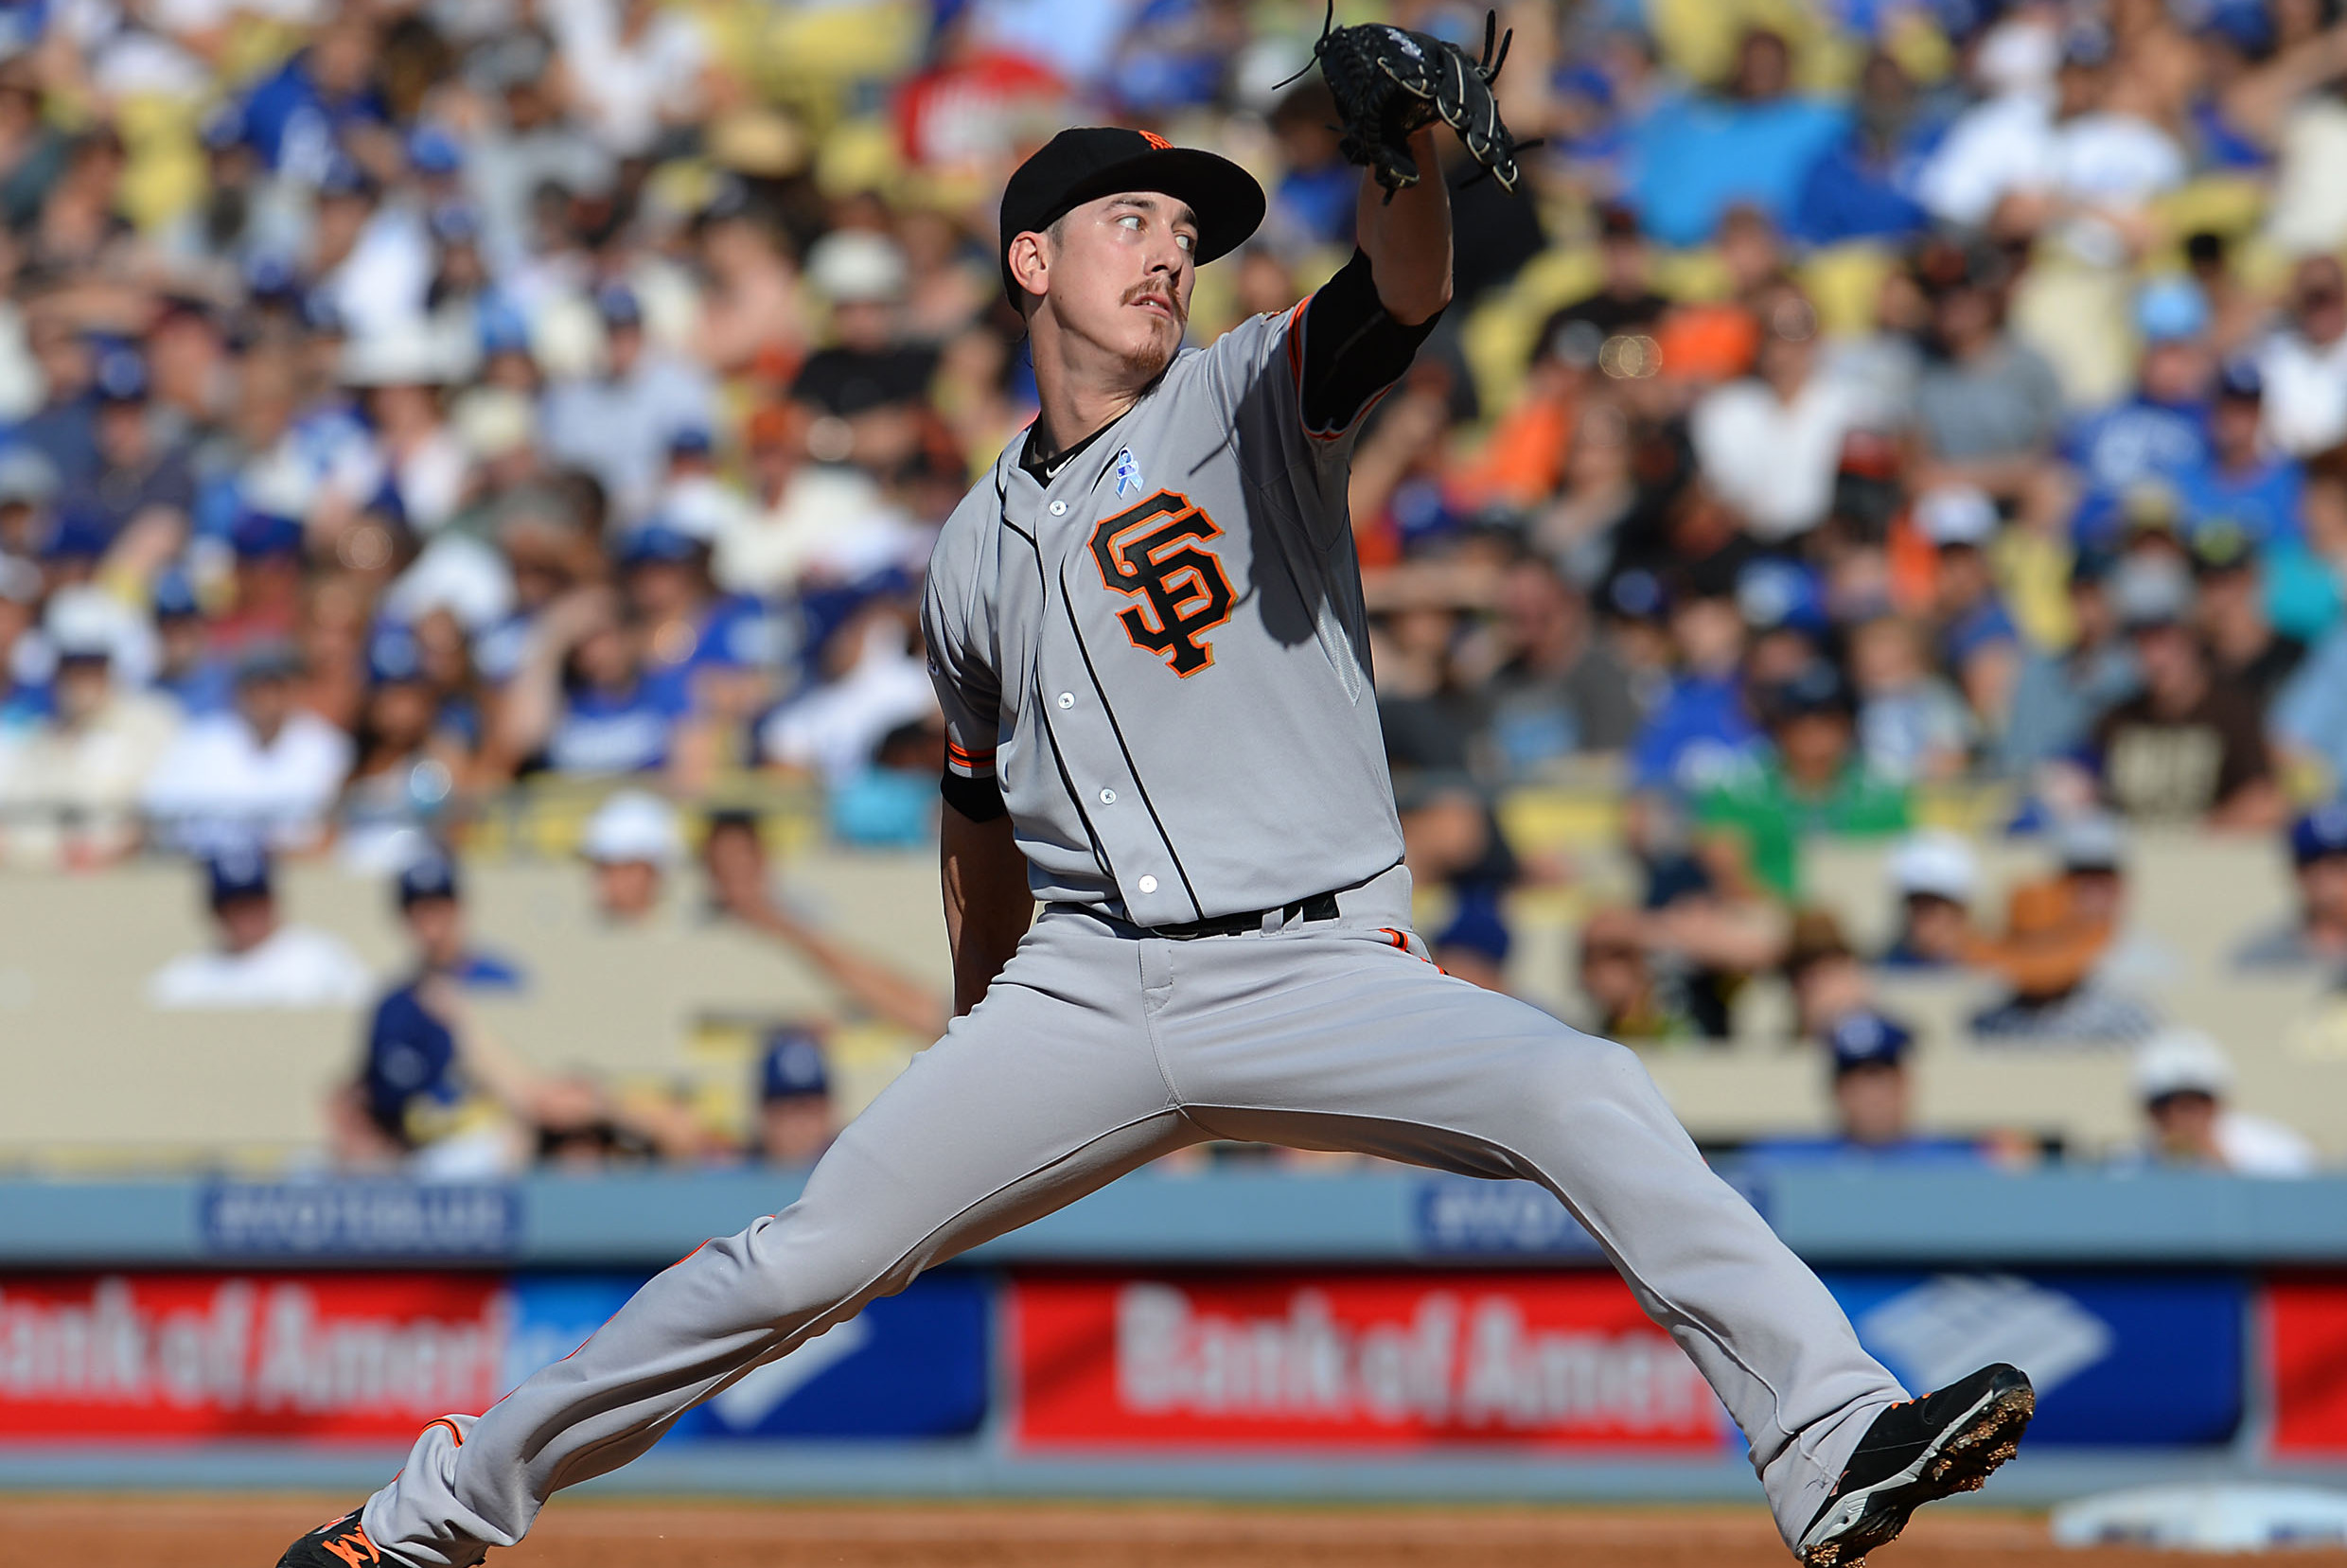 Tim Lincecum injury update: Giants RHP available for Game 3